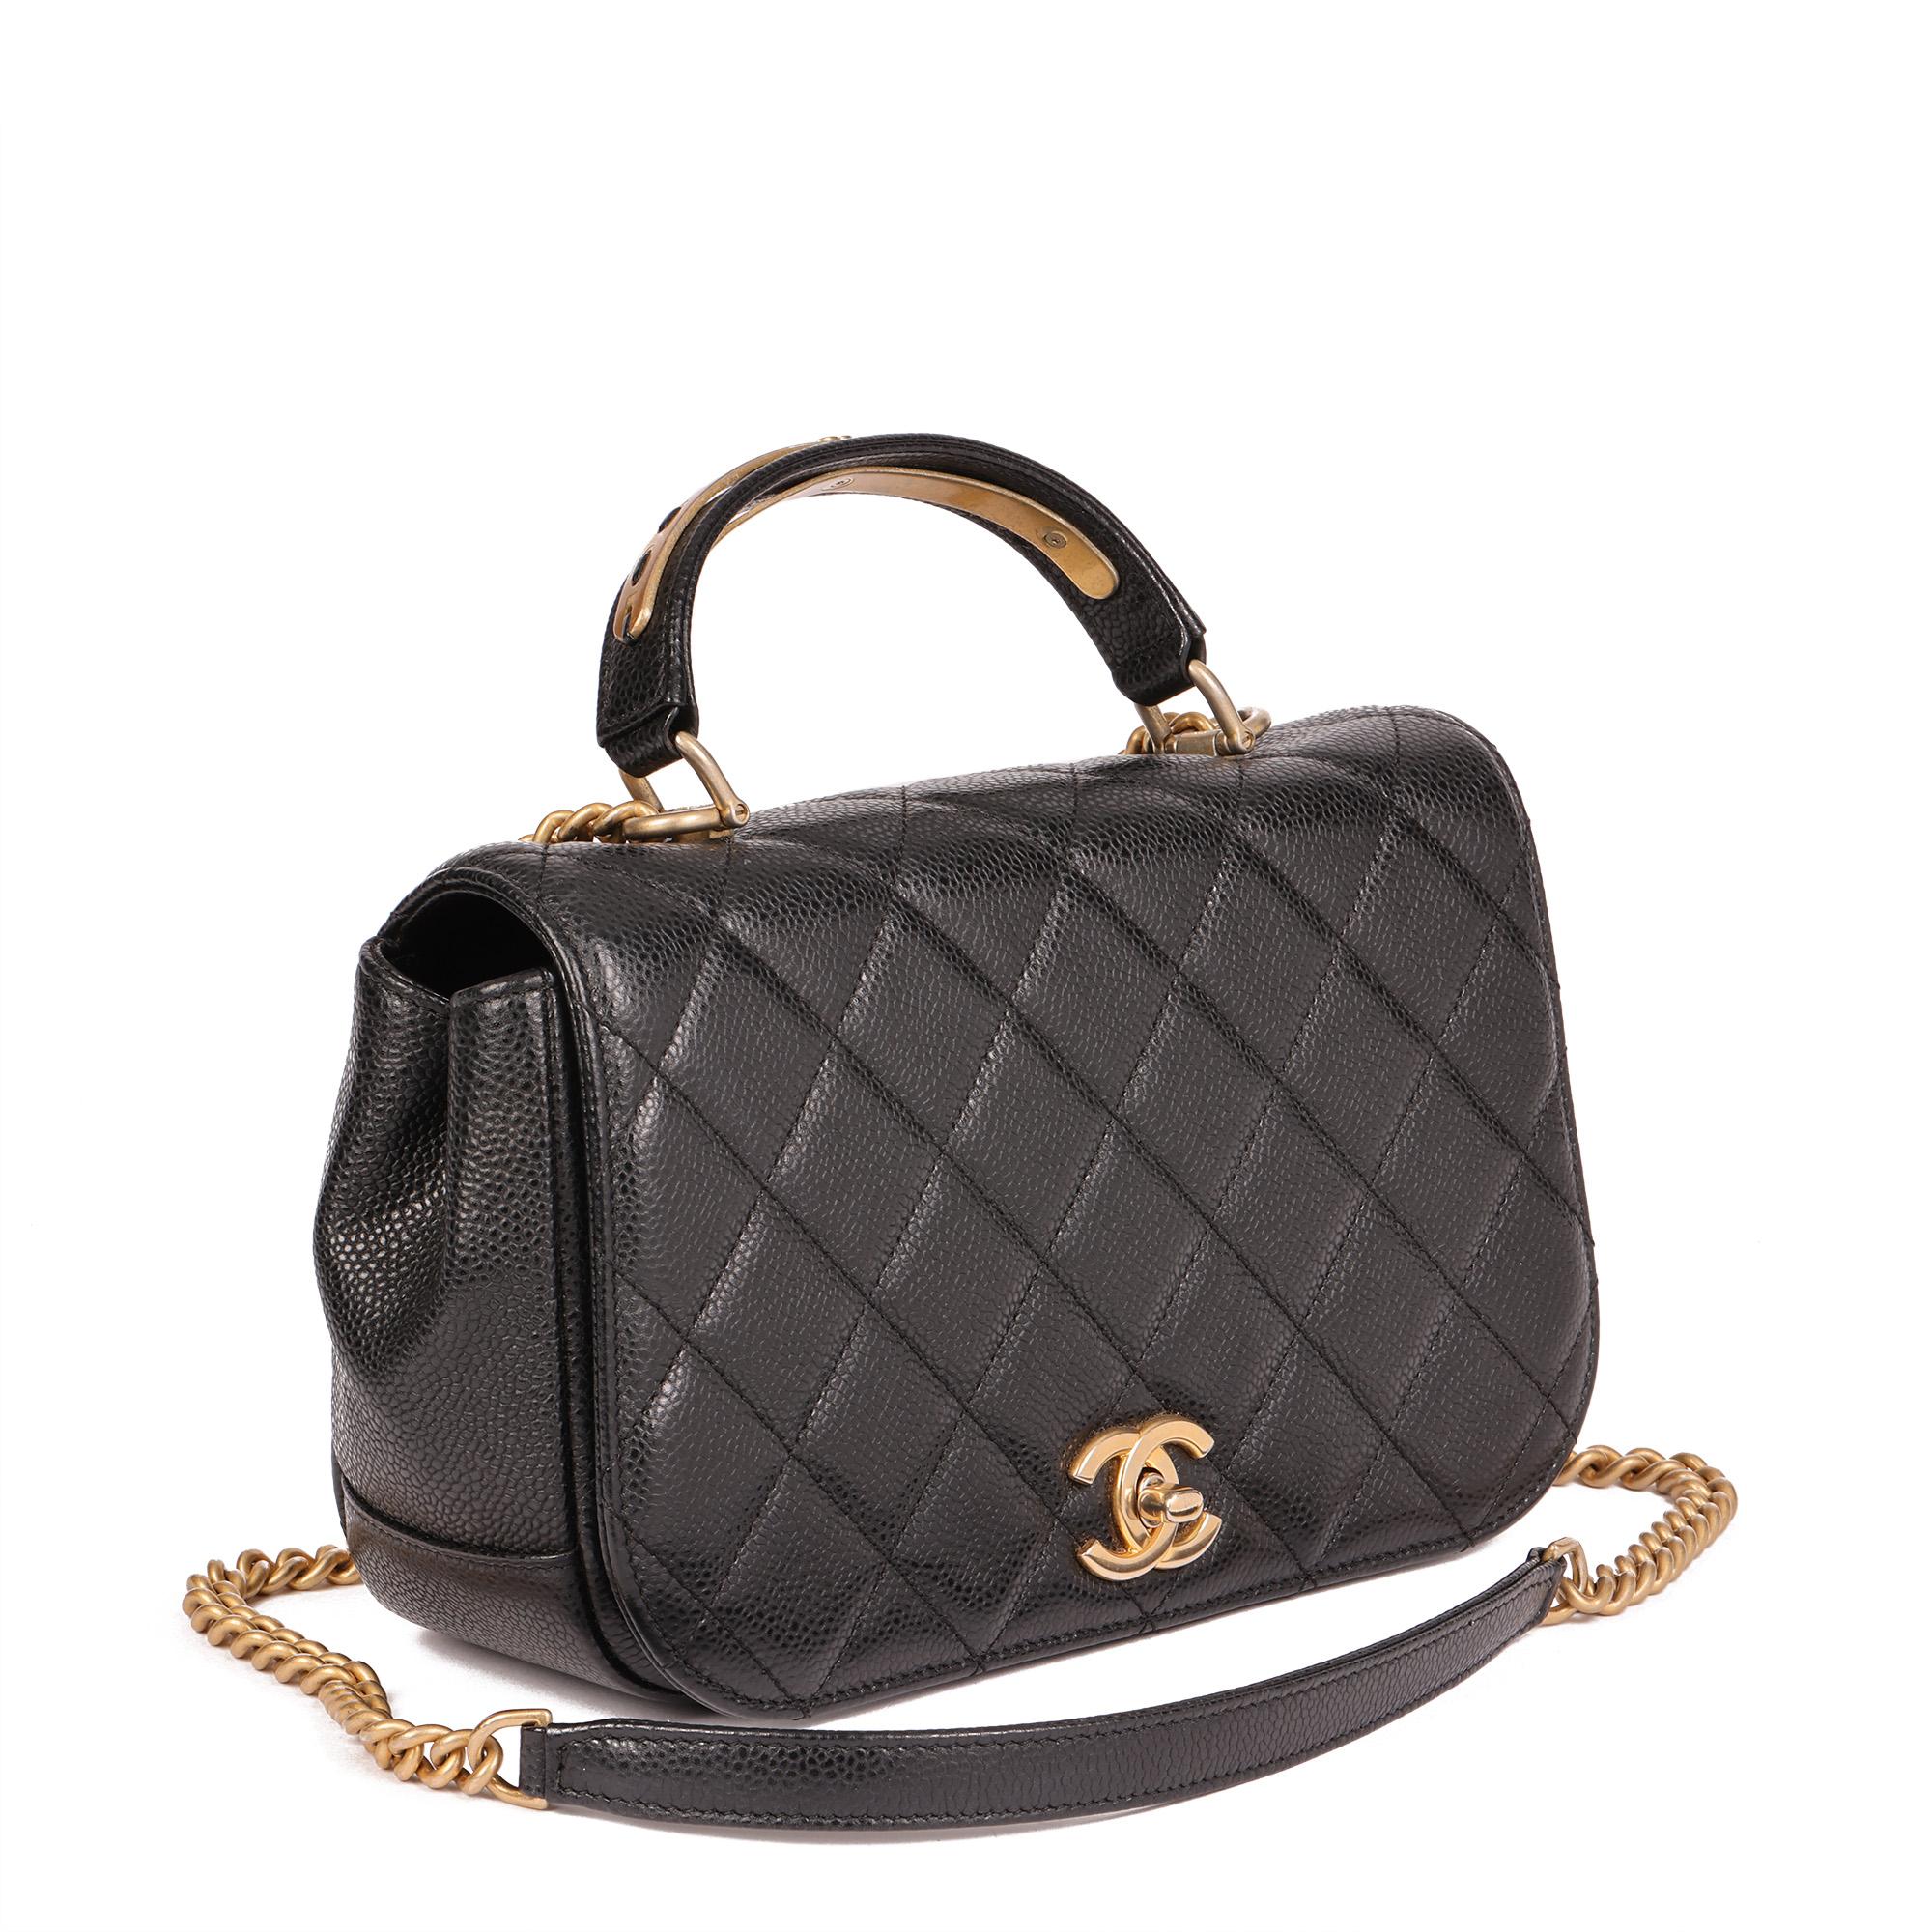 CHANEL
Black Quilted Caviar Leather Medium Classic Top Handle Flap Bag

Serial Number: 24492803
Age (Circa): 2018
Accompanied By: Chanel Dust Bag, Authenticity Card
Authenticity Details: Authenticity Card, Serial Sticker (Made in Italy)
Gender: